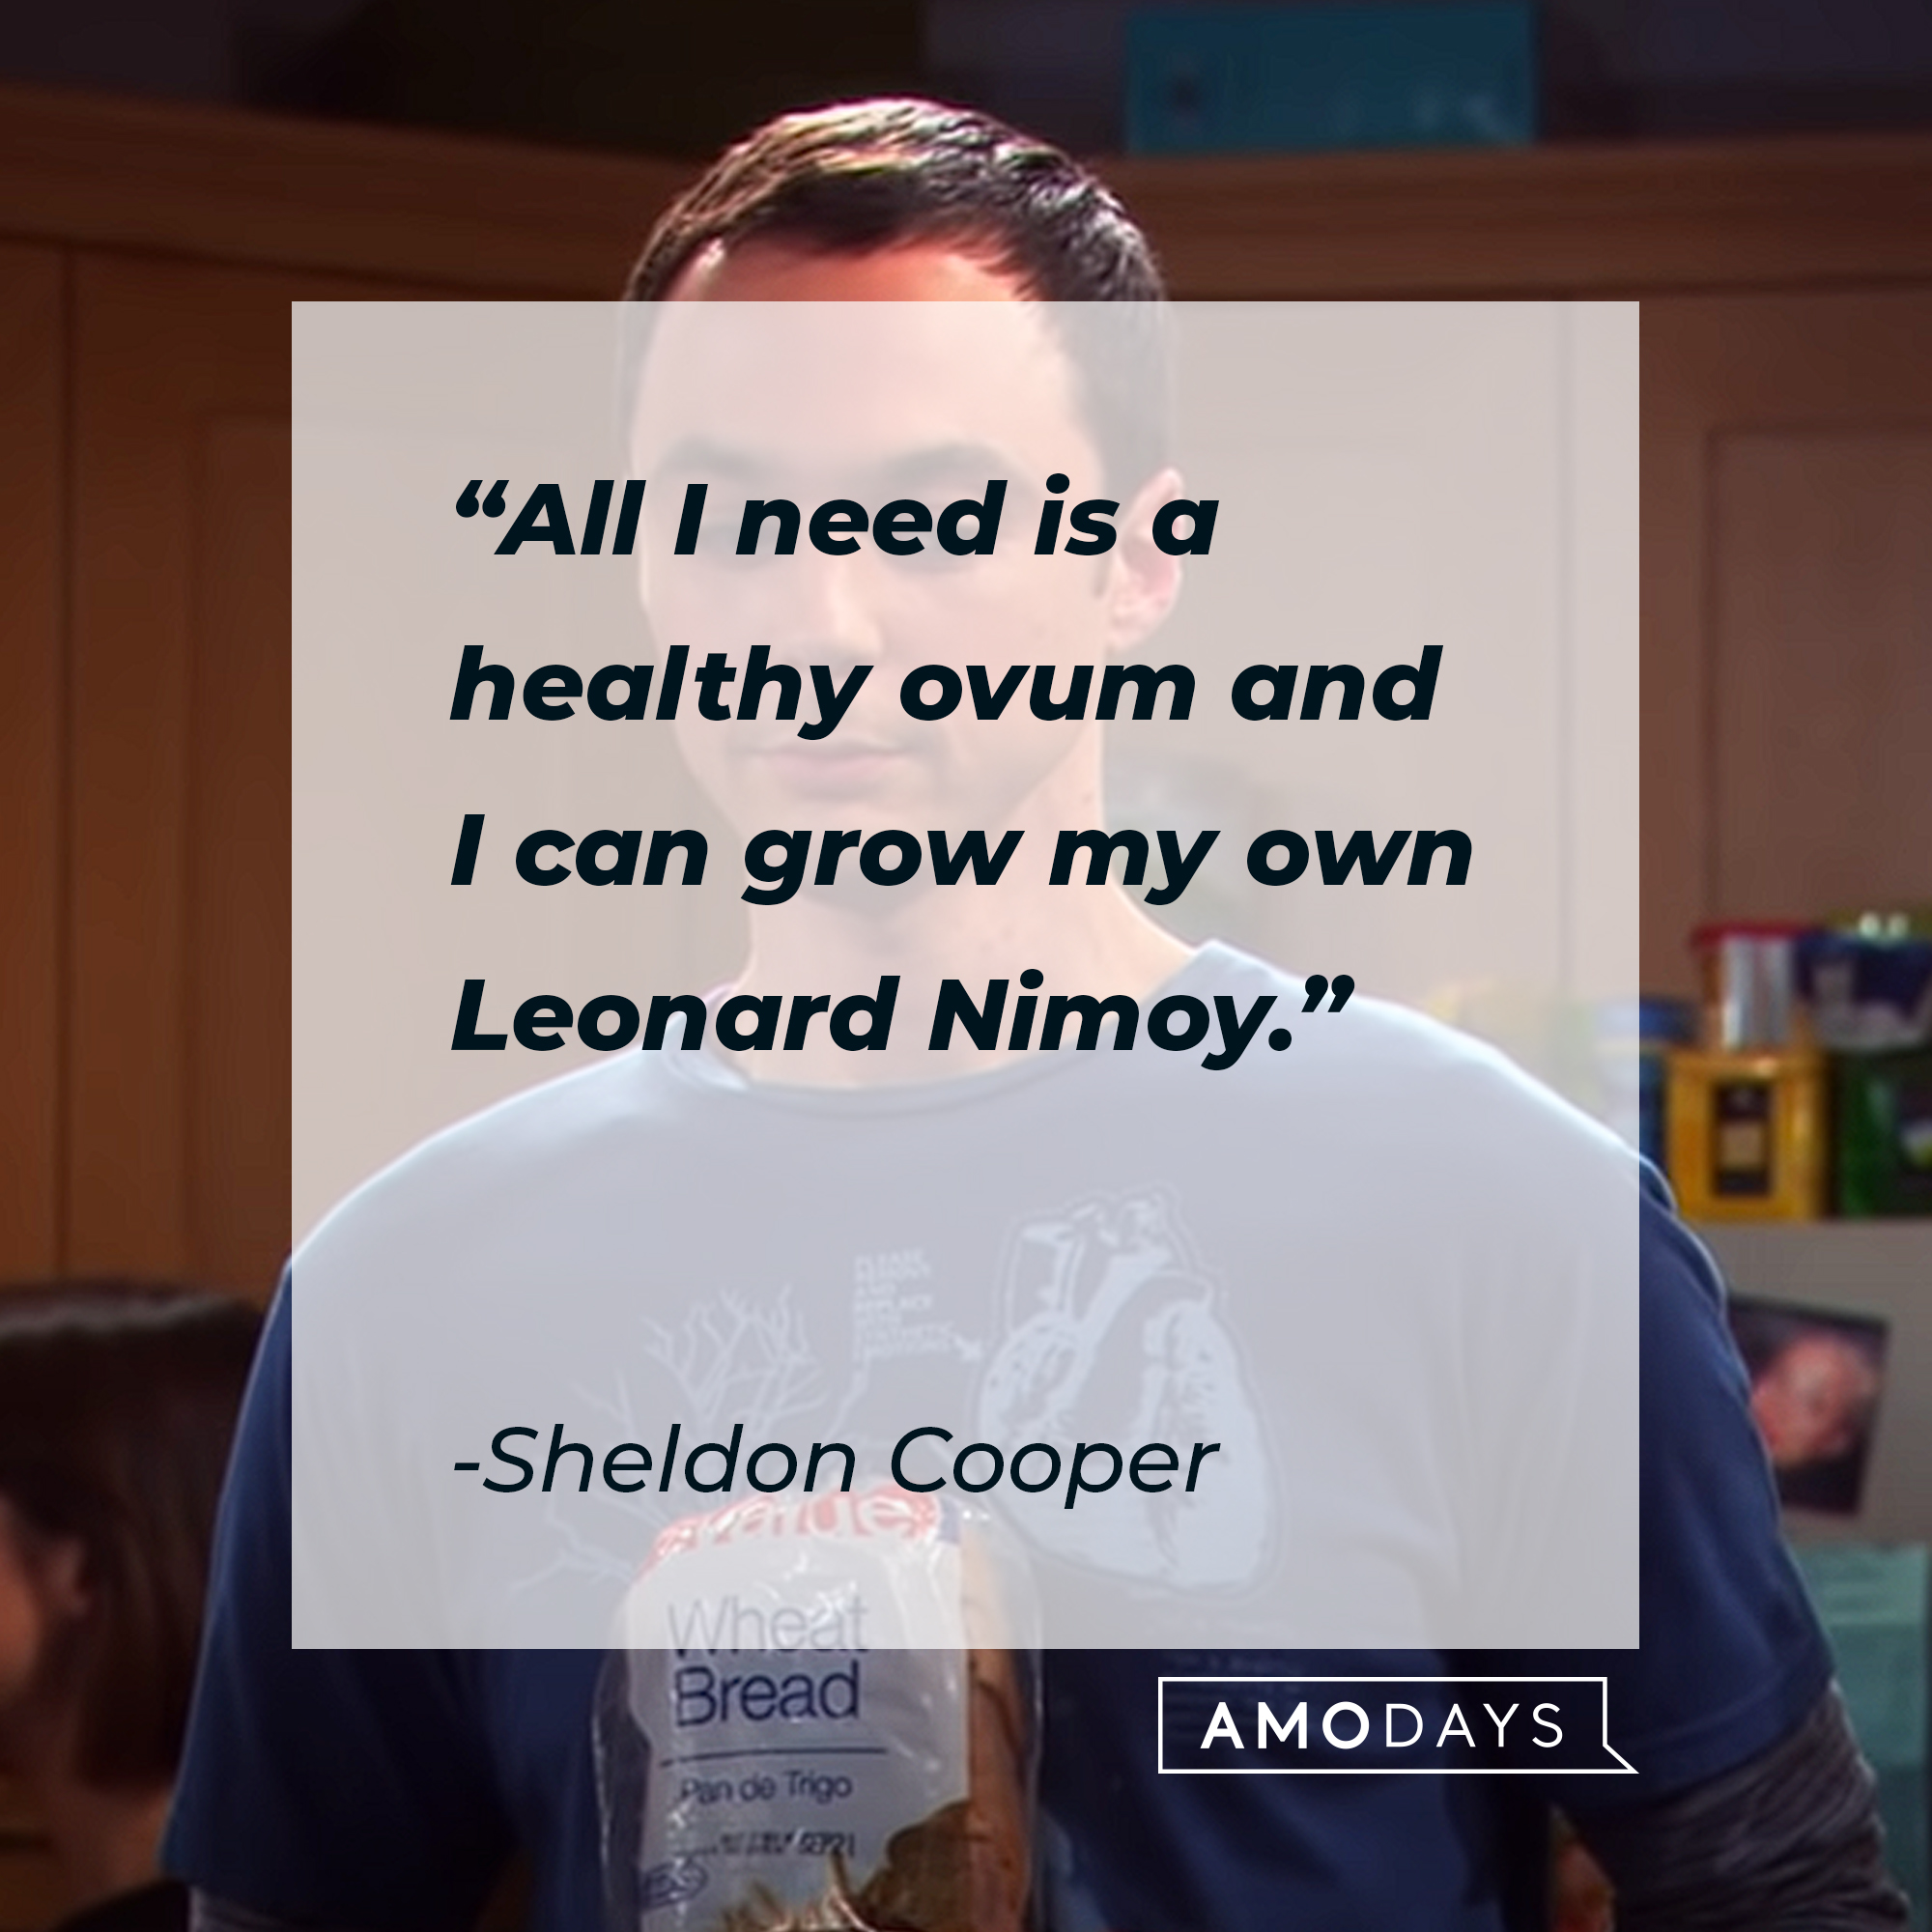 Sheldon Cooper's quote: "All I need is a healthy ovum and I can grow my own Leonard Nimoy." | Source: youtube.com/warnerbrostv